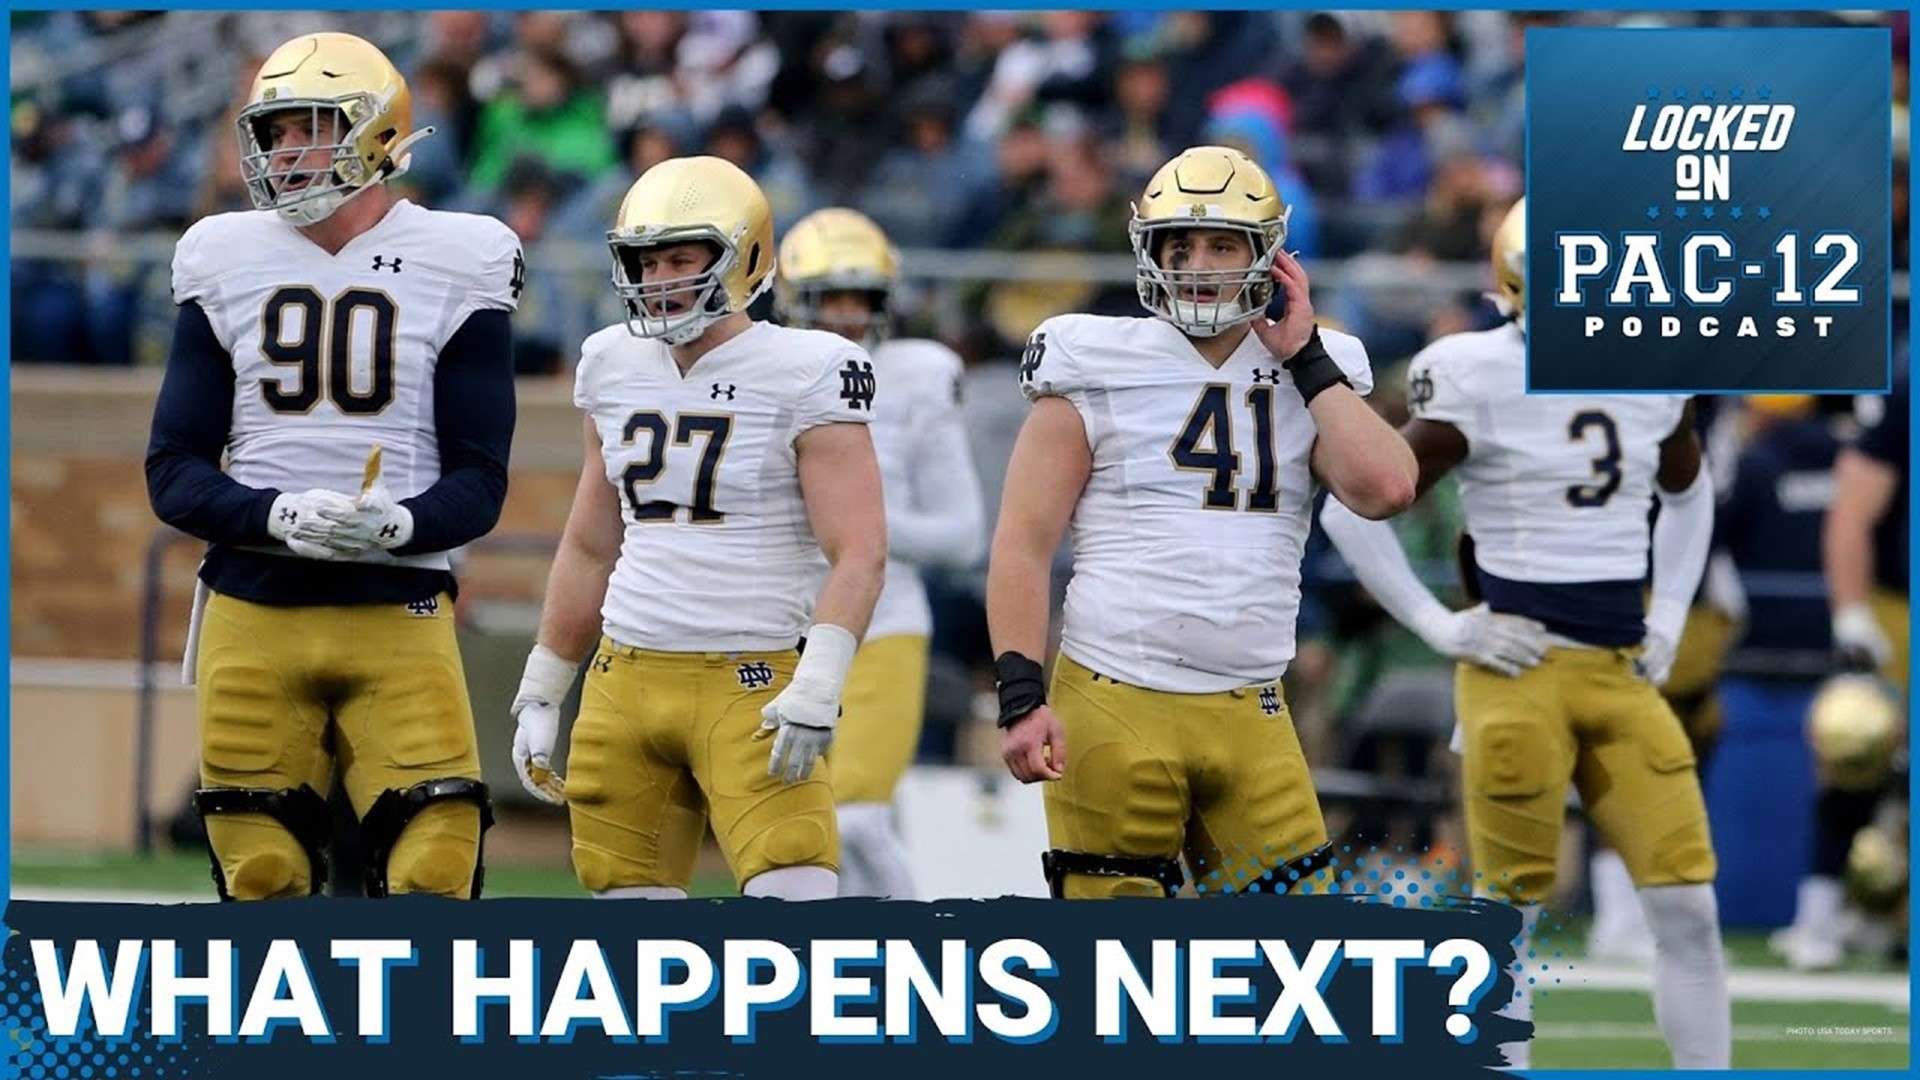 Notre Dame Football remain an independent team, despite years of conferences openly stating their desire to add the Fighting Irish's football program.